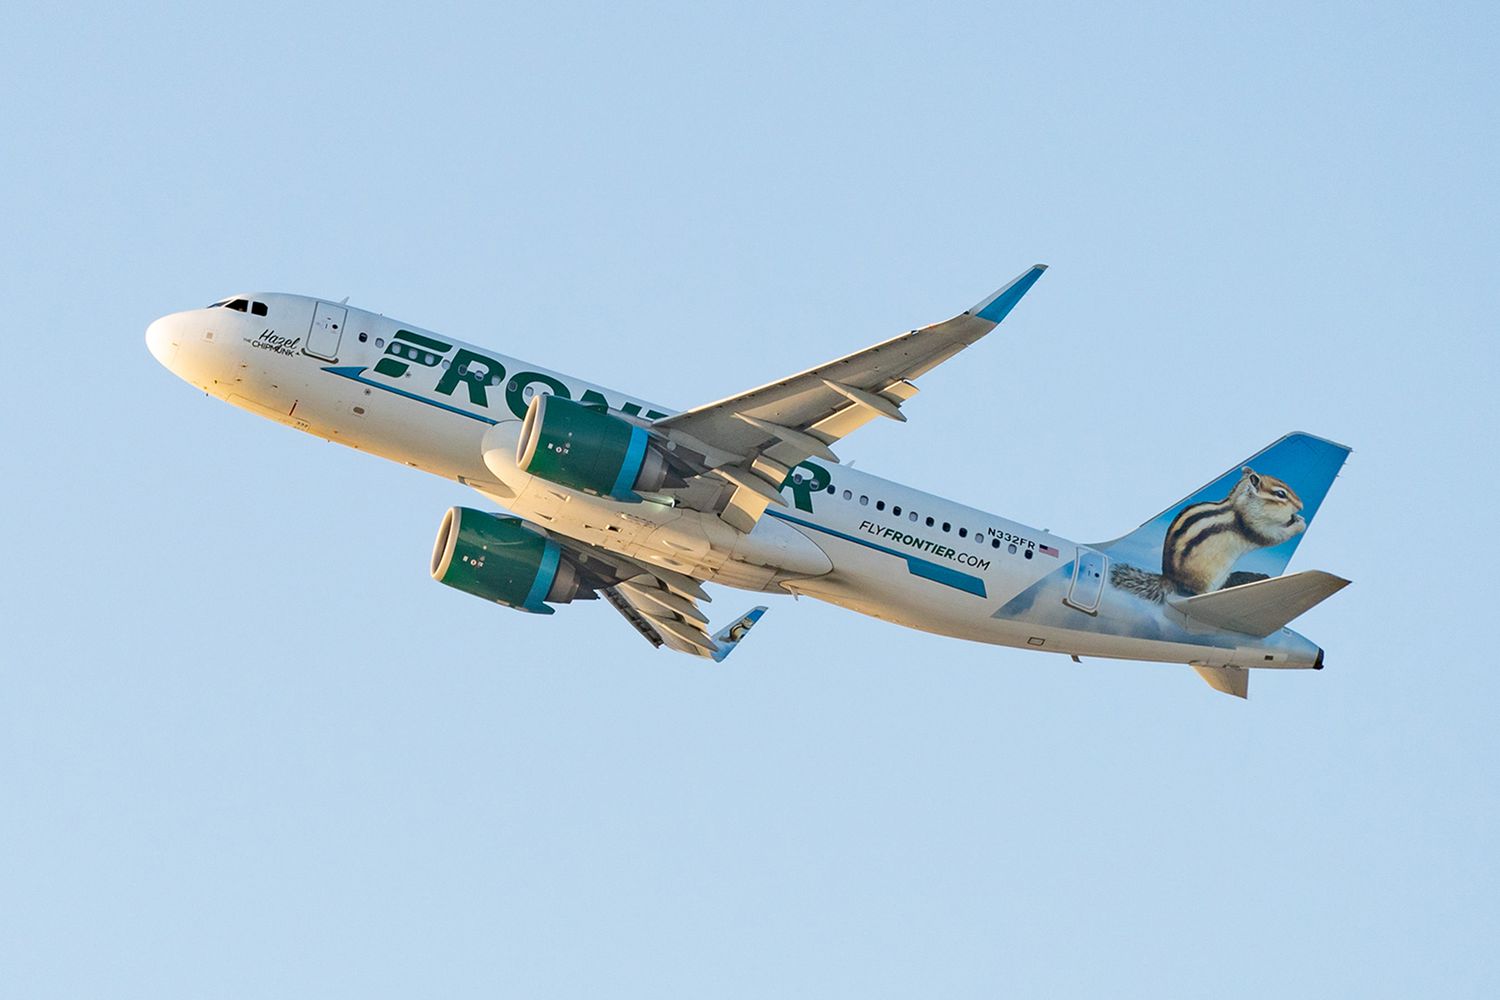 Soaring Higher: Frontier Airlines Revamps Its Pricing Strategy